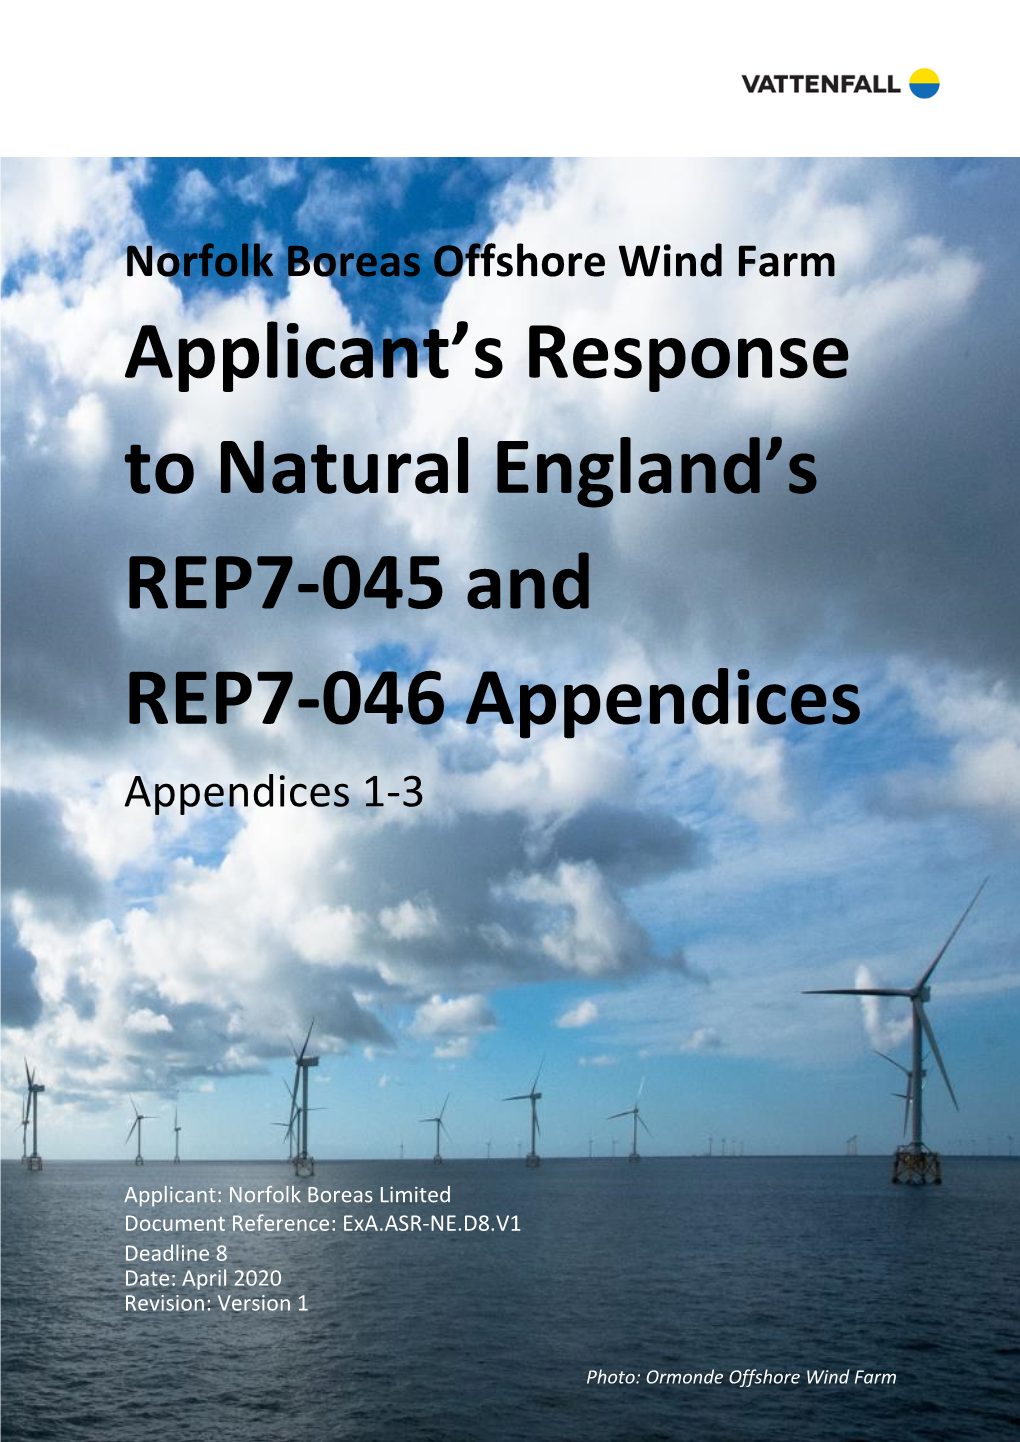 Applicant's Response to Natural England's REP7-045 and REP7